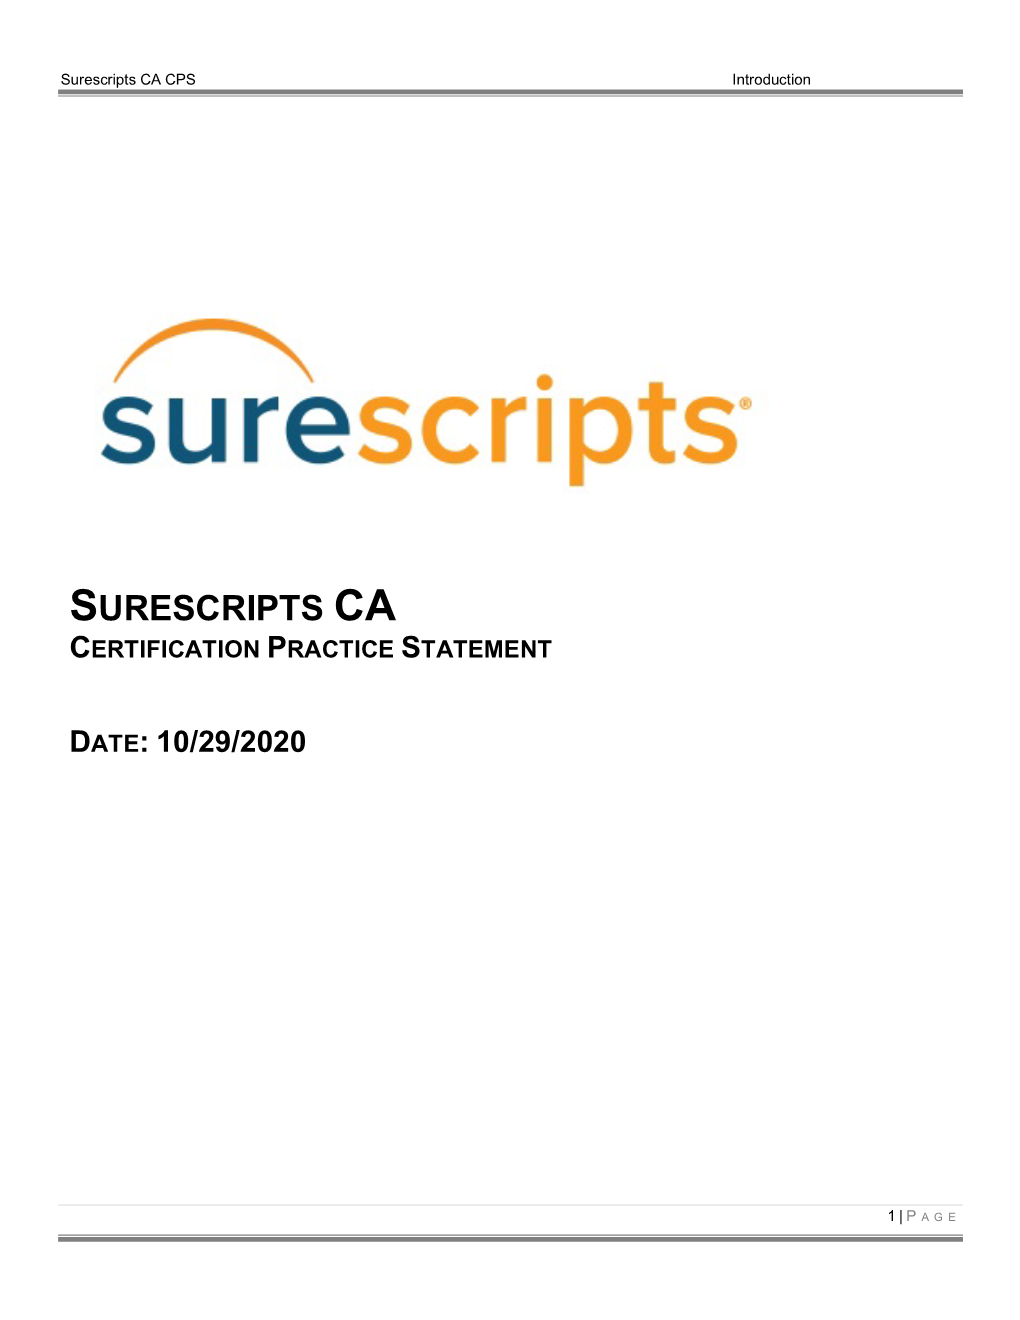 Surescripts Direct Issuing CA